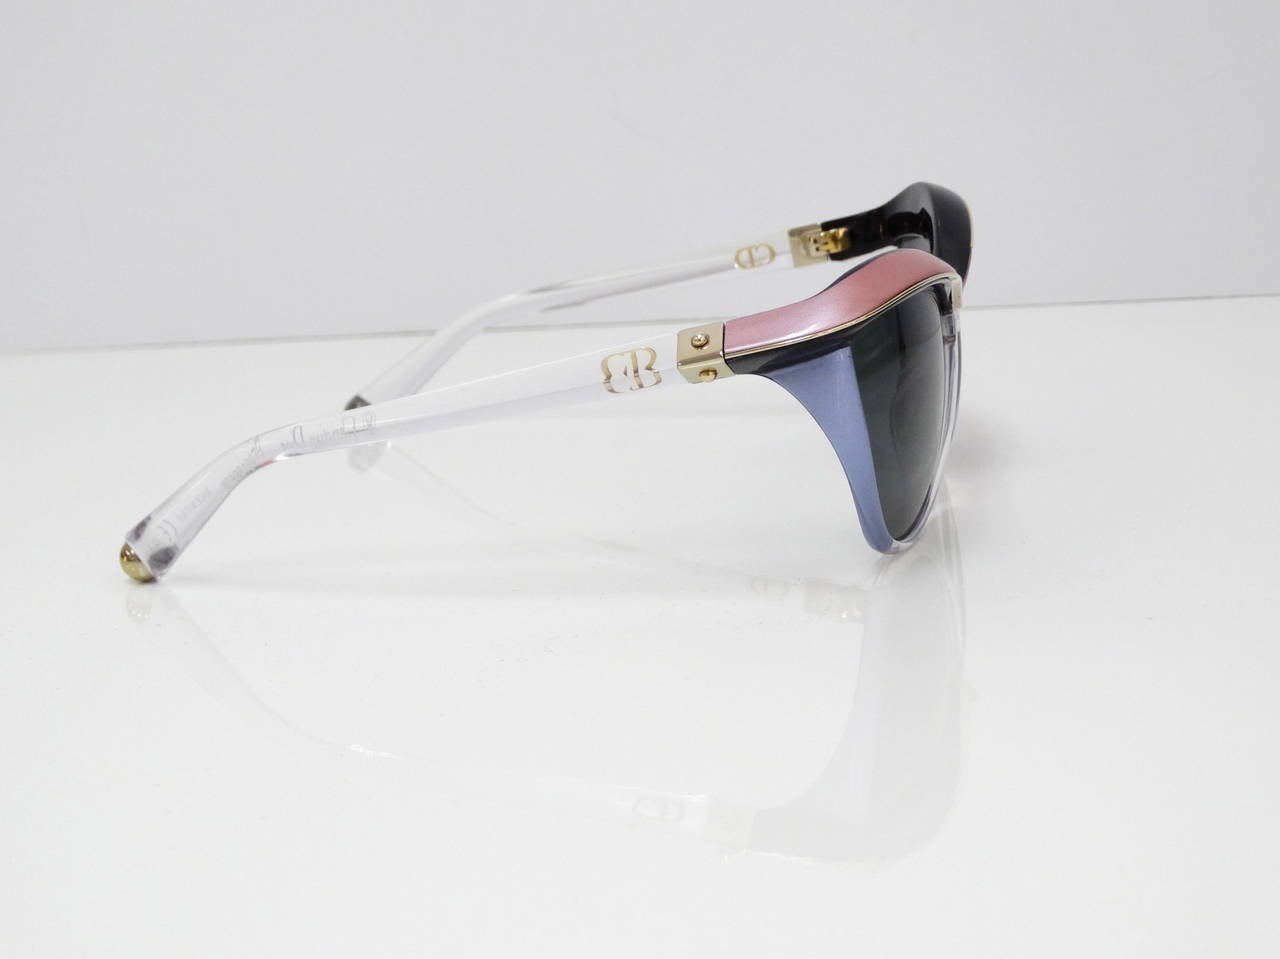 2013 Special Edition: the Dior Demoiselle 1 Sunglasses express Dior’s modern elegance and savoir-faire. The futuristic design features accentuate Dior’s constant fervour for fashion perfection with touches of colour meeting in a beautiful butterfly